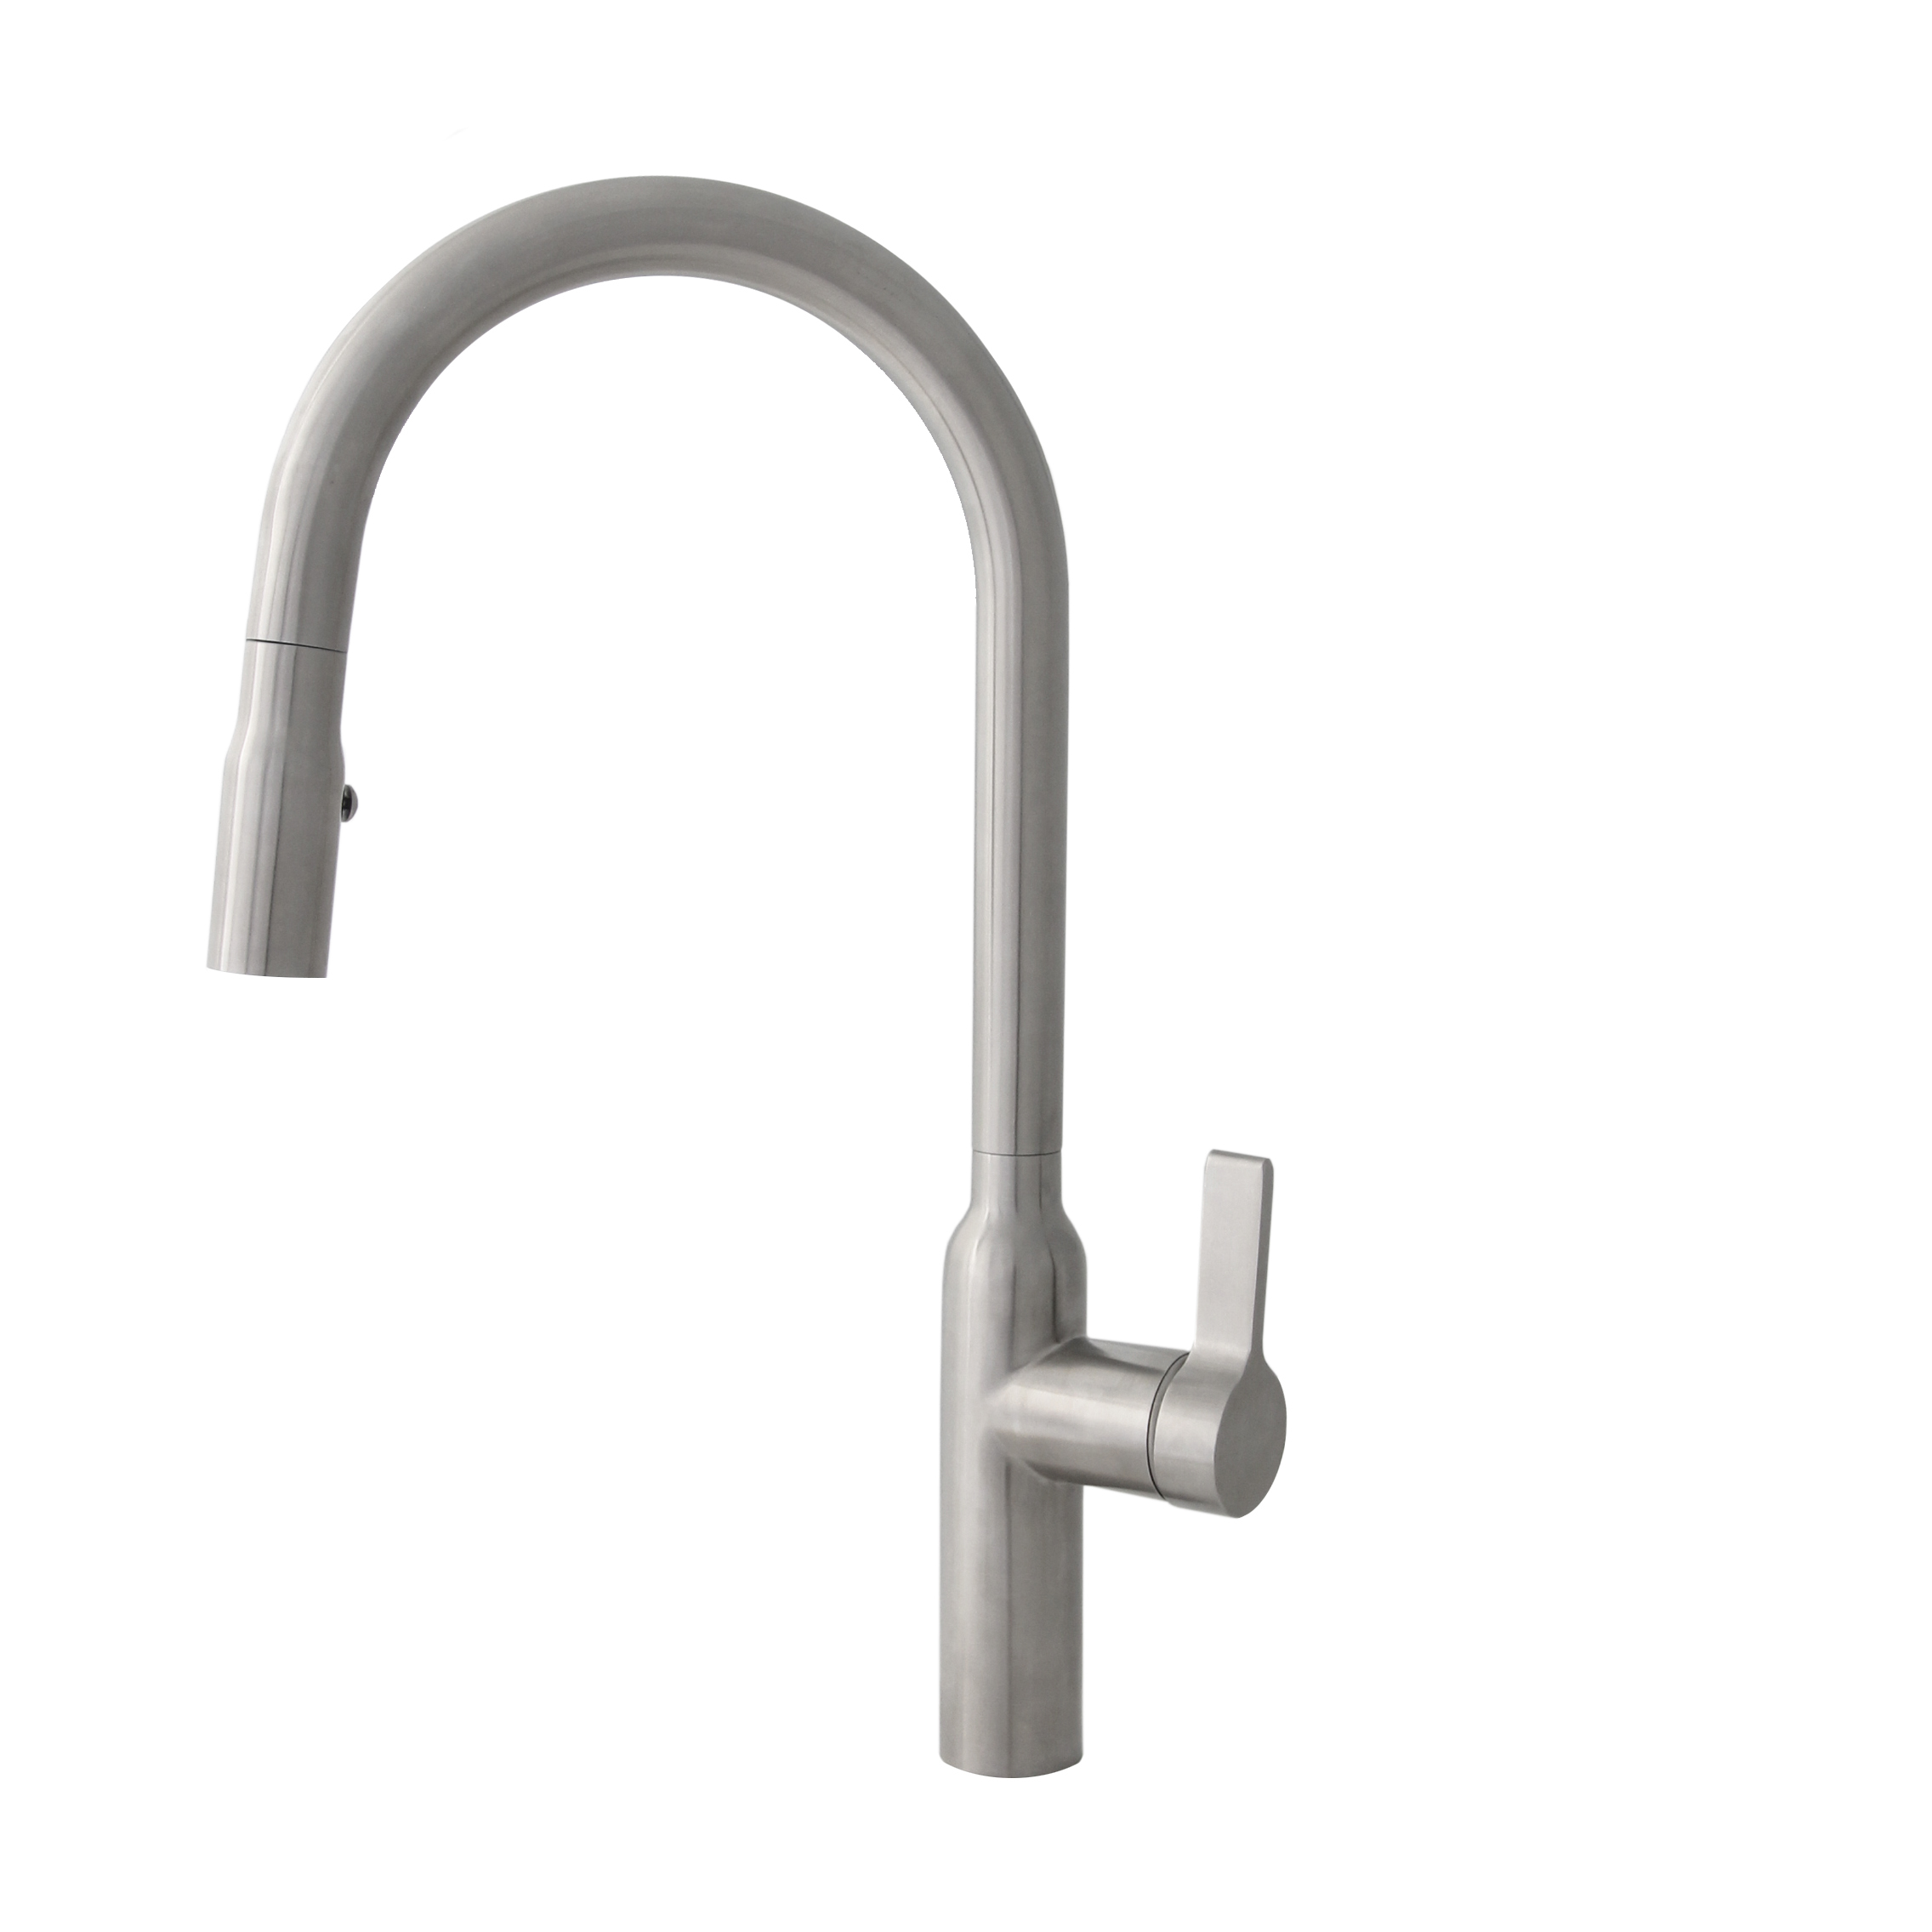 STYLISH Kitchen Sink Faucet Stainless Steel Brushed Finish